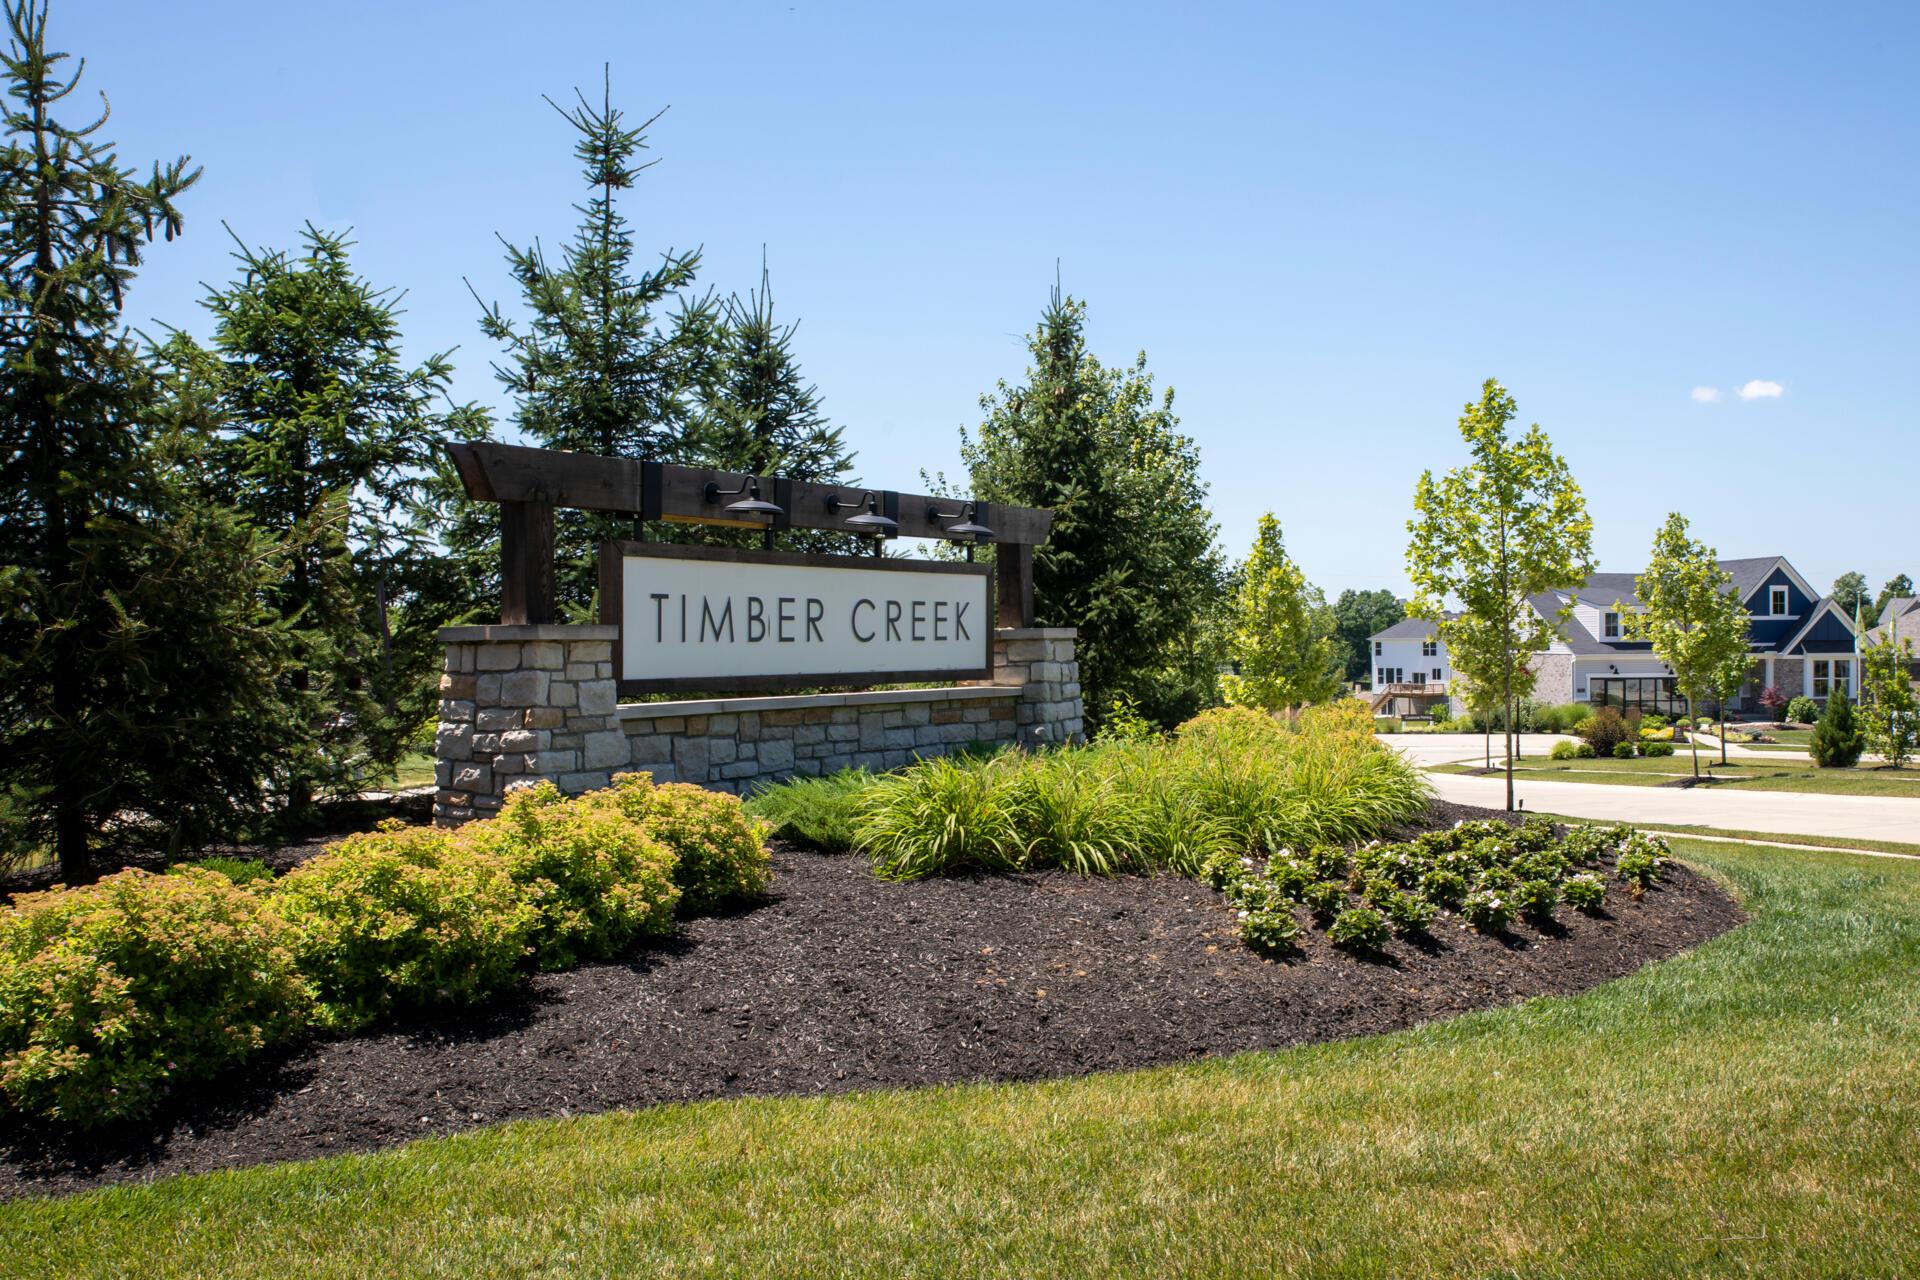 The Timber Creek Entrance